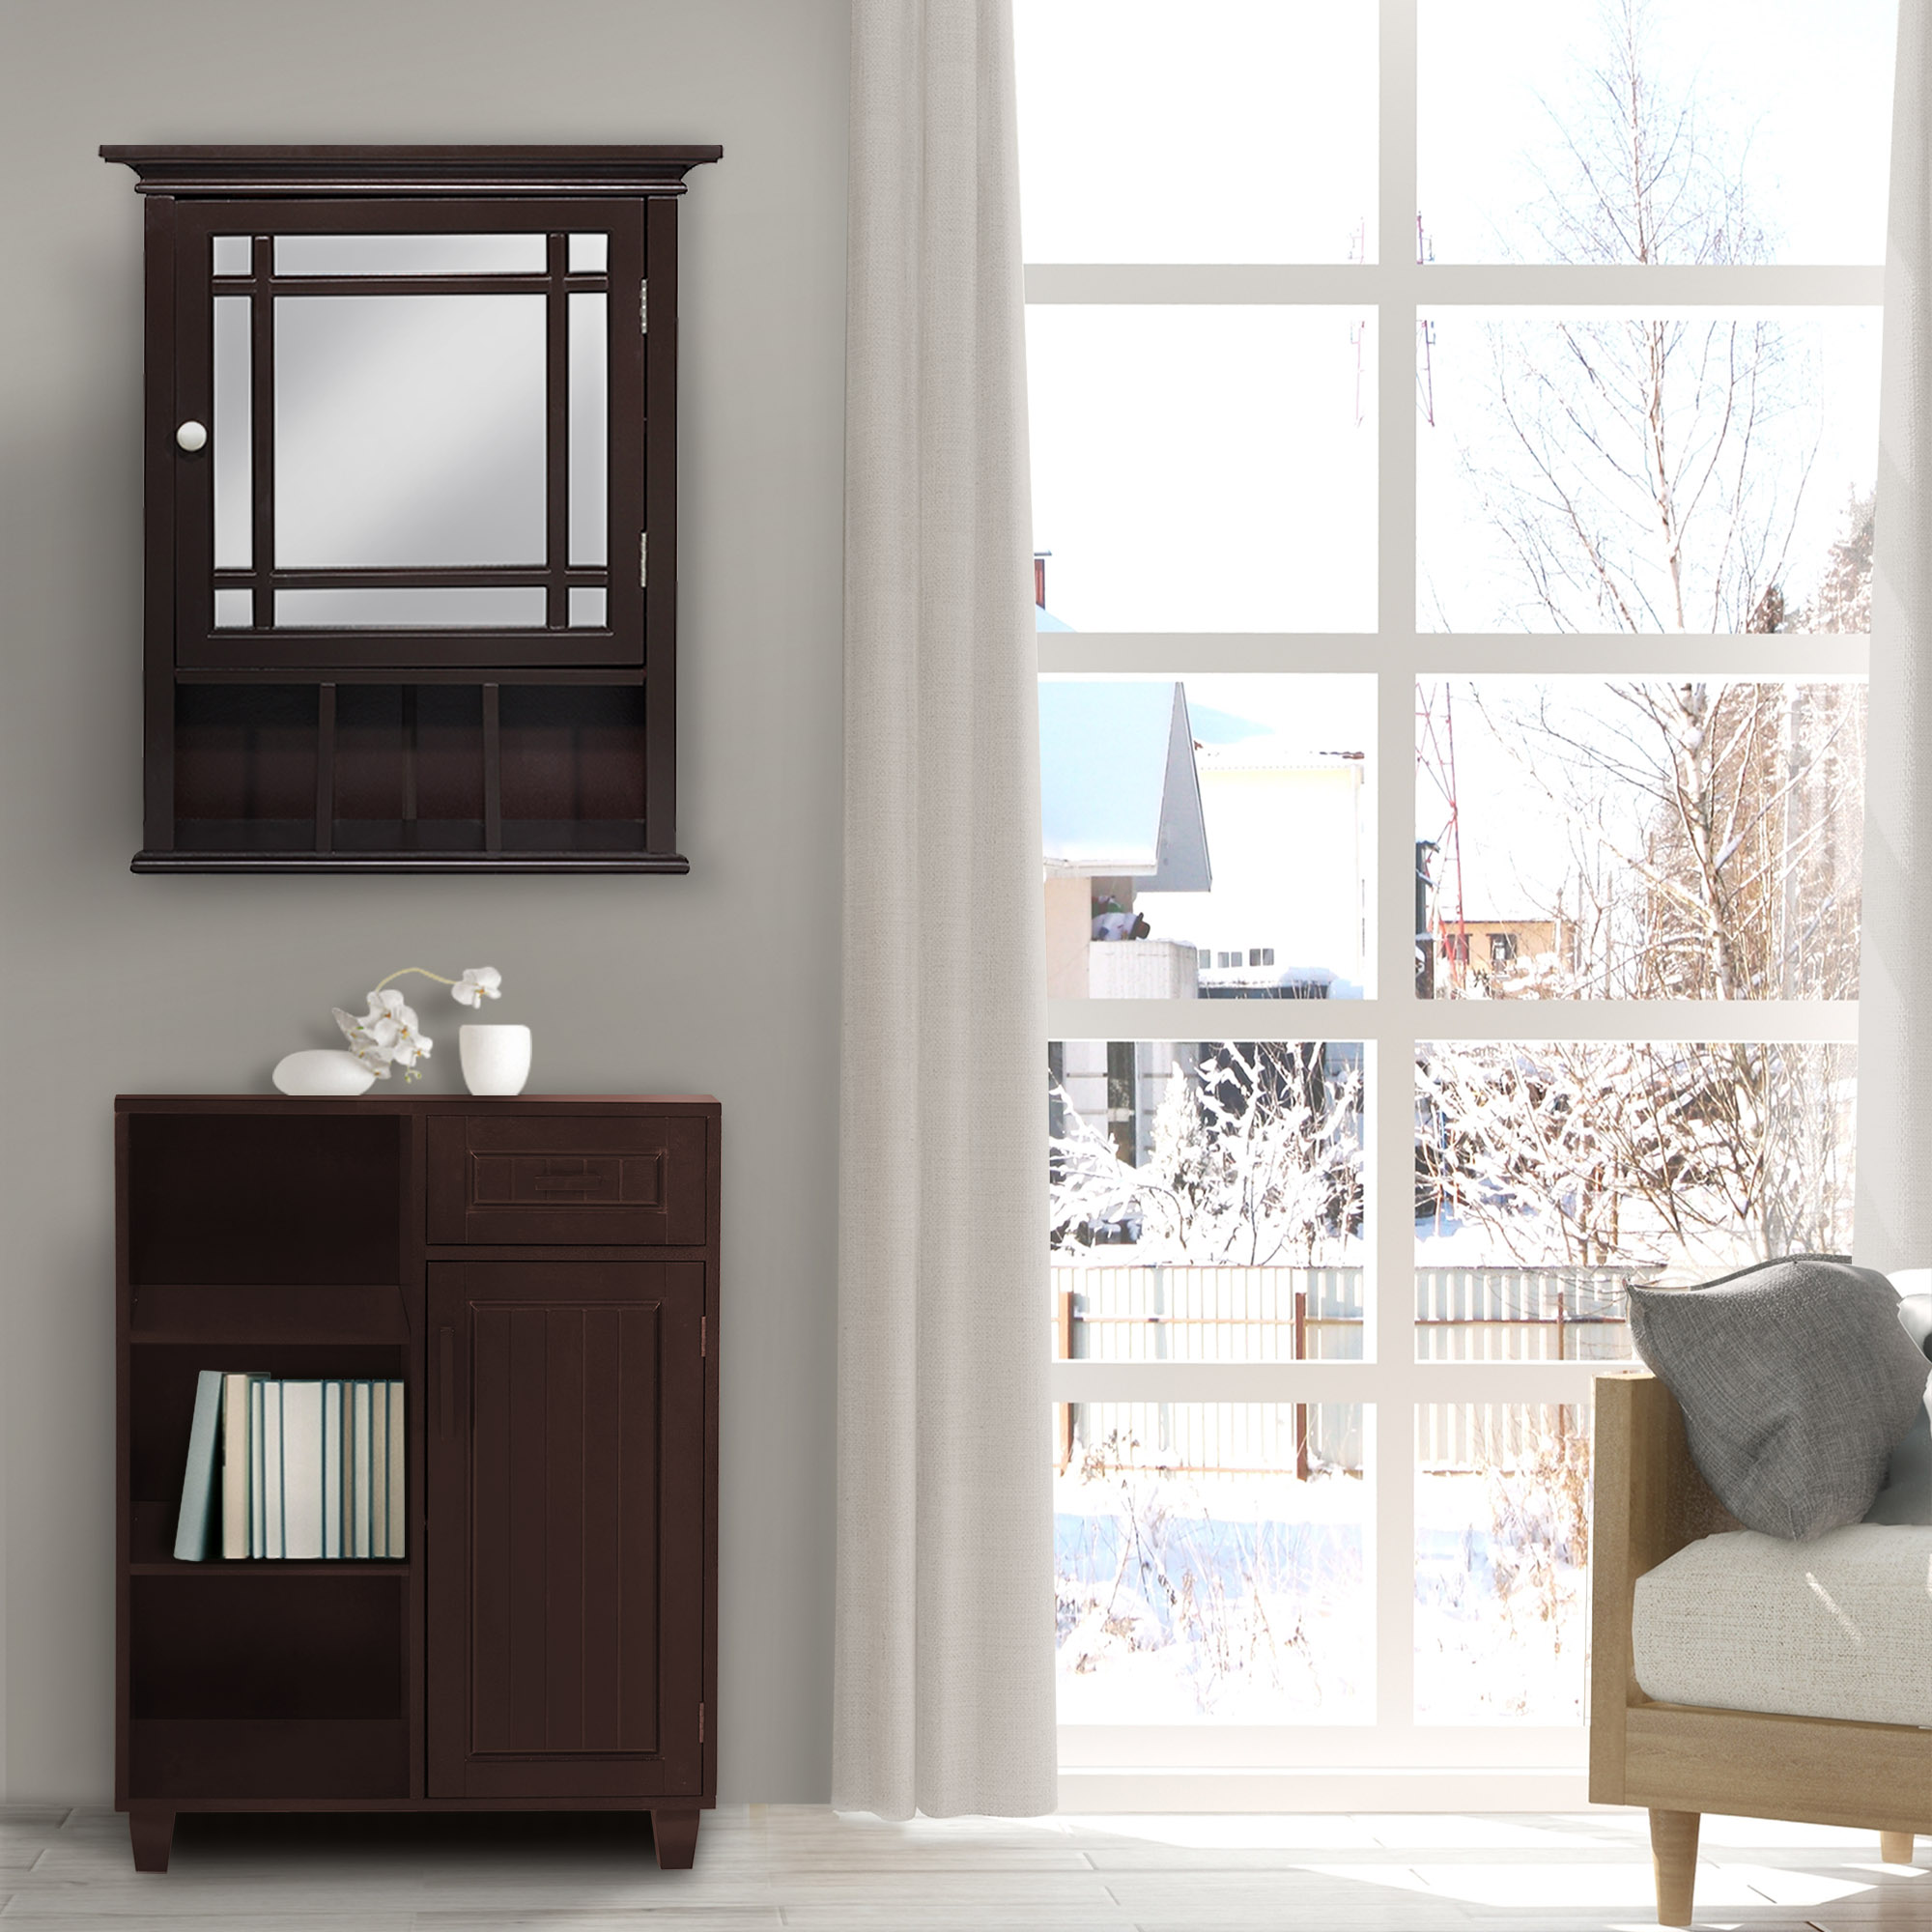 Teamson Home Neal Removable Wooden Medicine Cabinet with Mirrored Door, Espresso - image 2 of 7